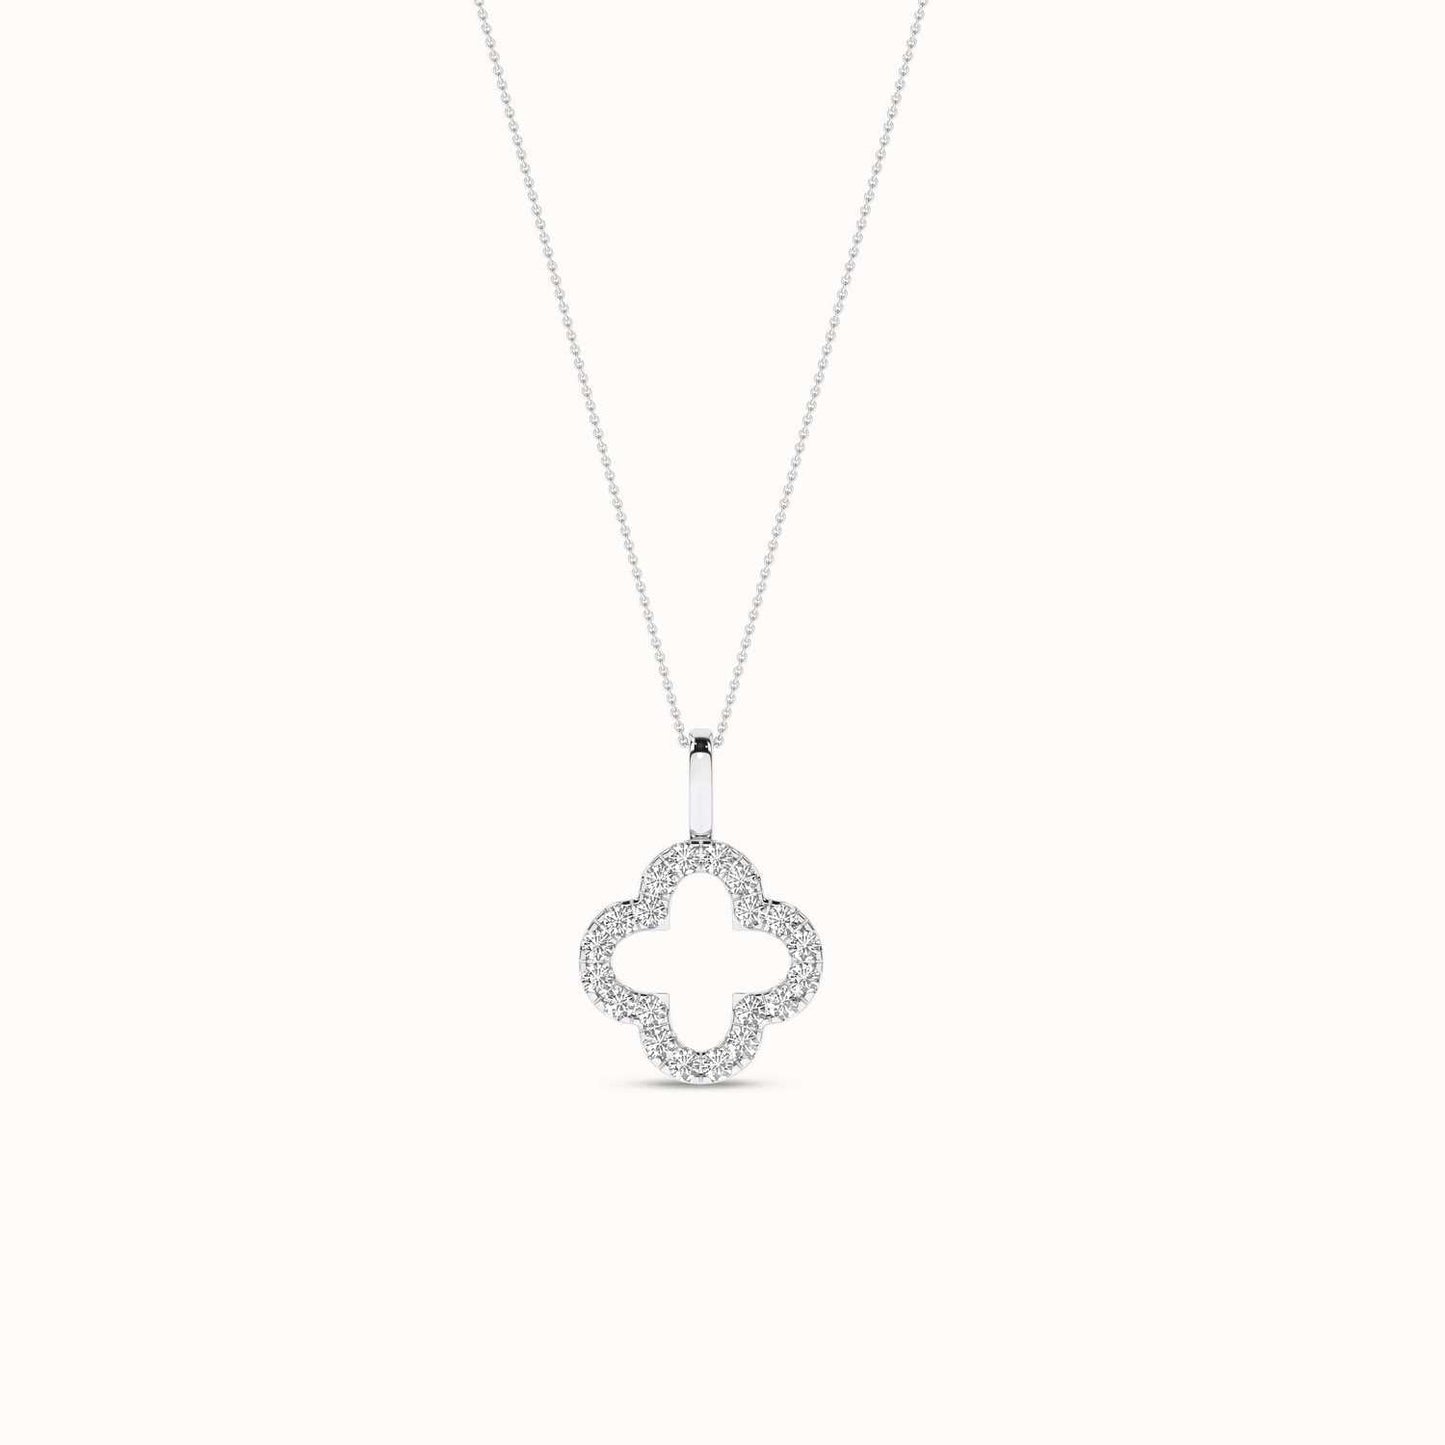 Clover Silhouette Drop Necklace_Product Angle_1/5Ct. - 1